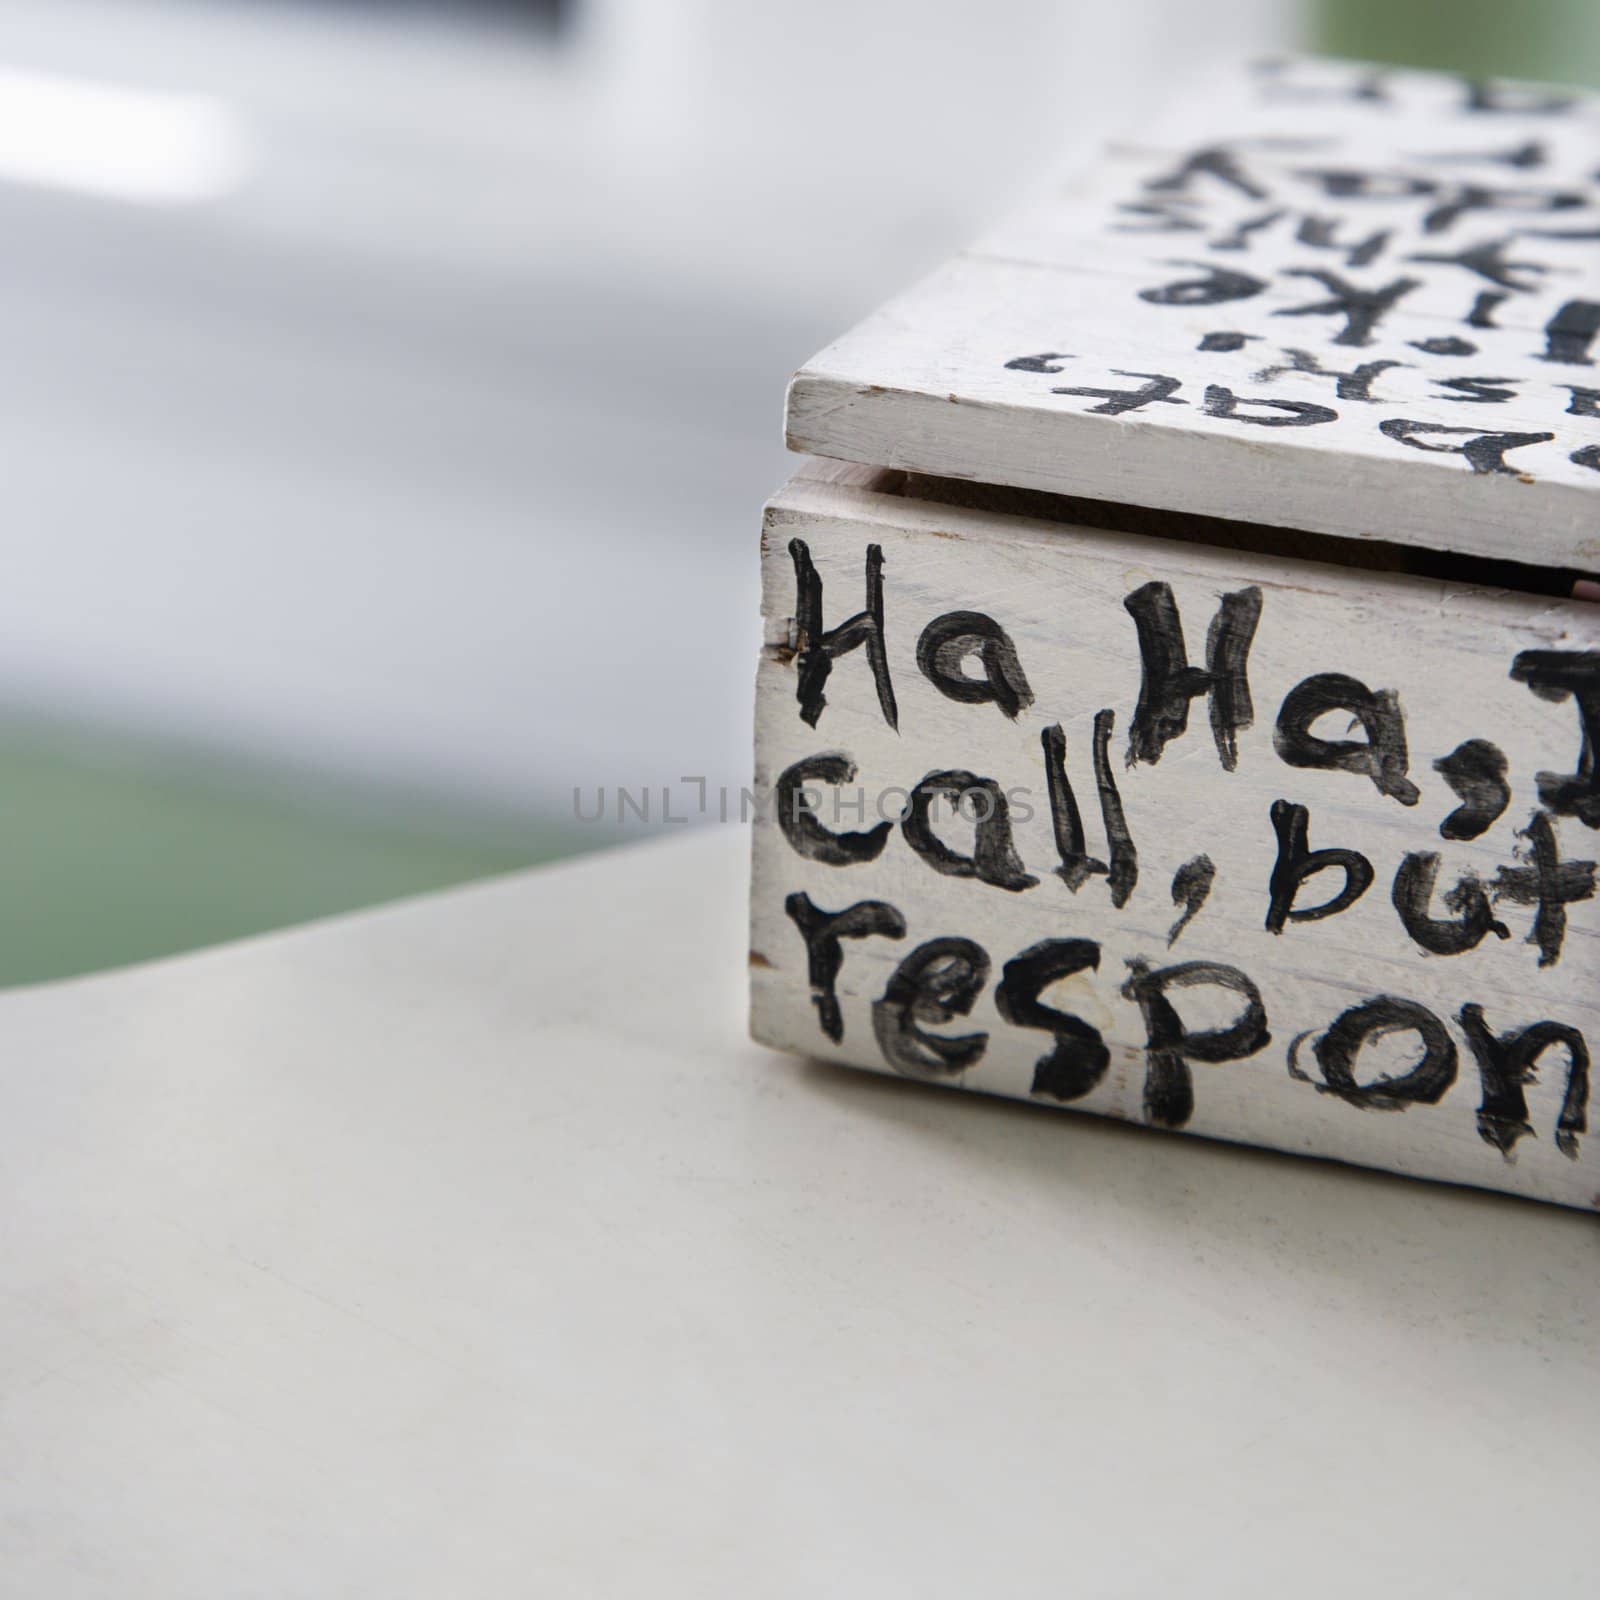 Hand painted box with text starting with ha ha.